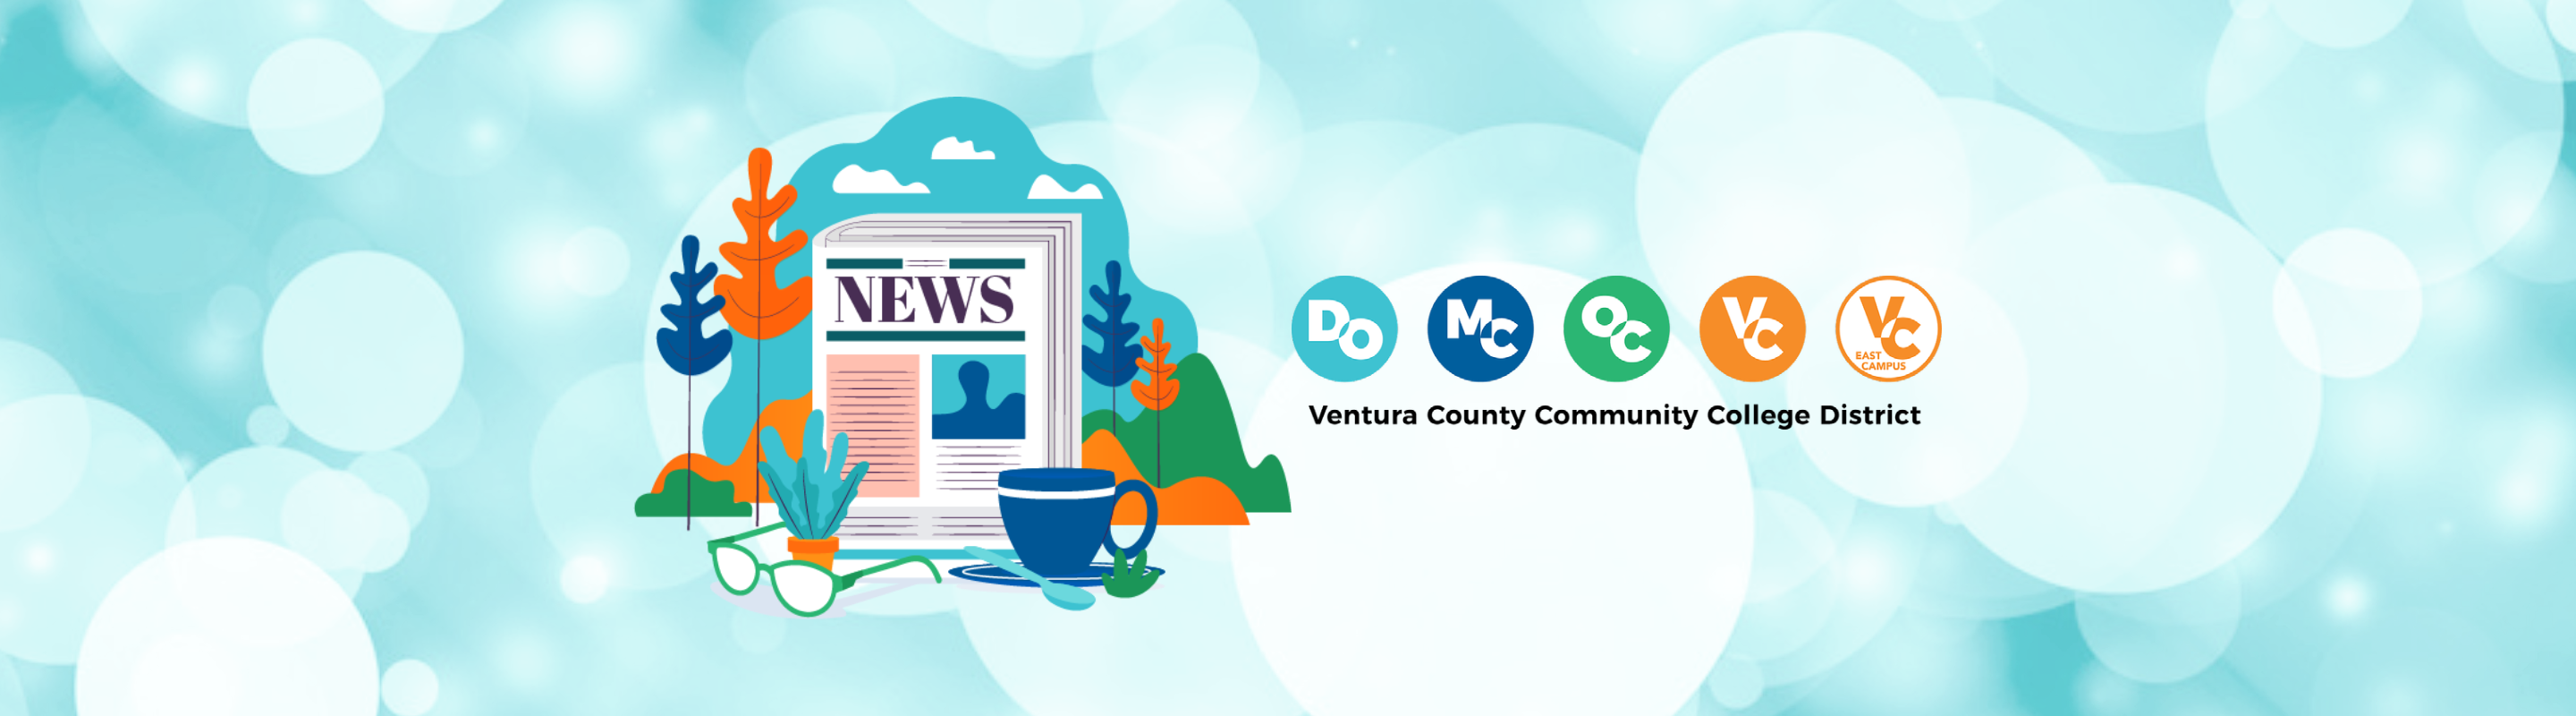 Illustration of a newspaper, glasses, mug, with plants and mountains in the background. Text that reads: DO, MC, OC, VC, VC East Campus. Ventura County Community College District. News.